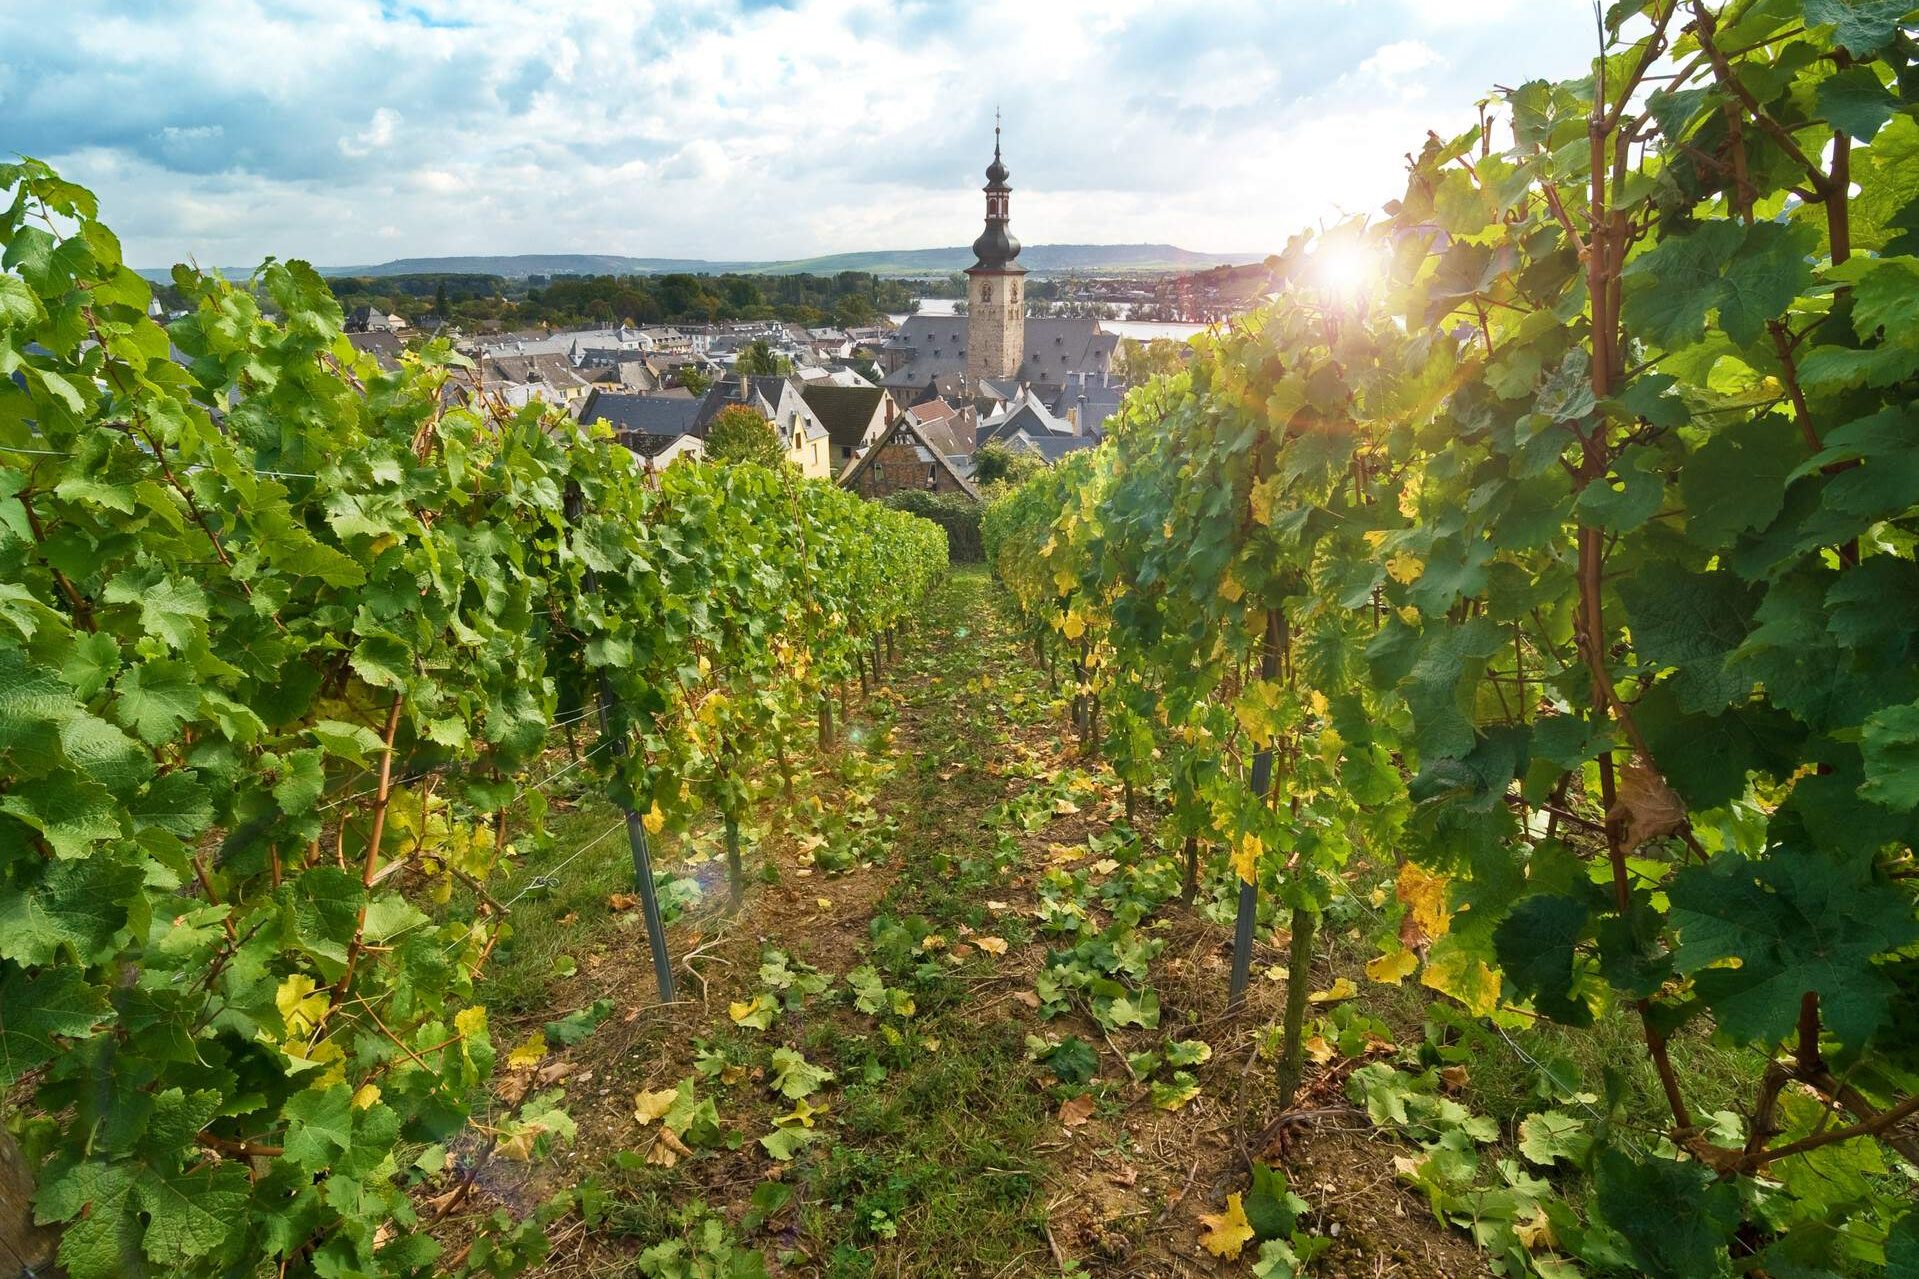 Town buildings and houses with a clock tower peeking through the vineyard.